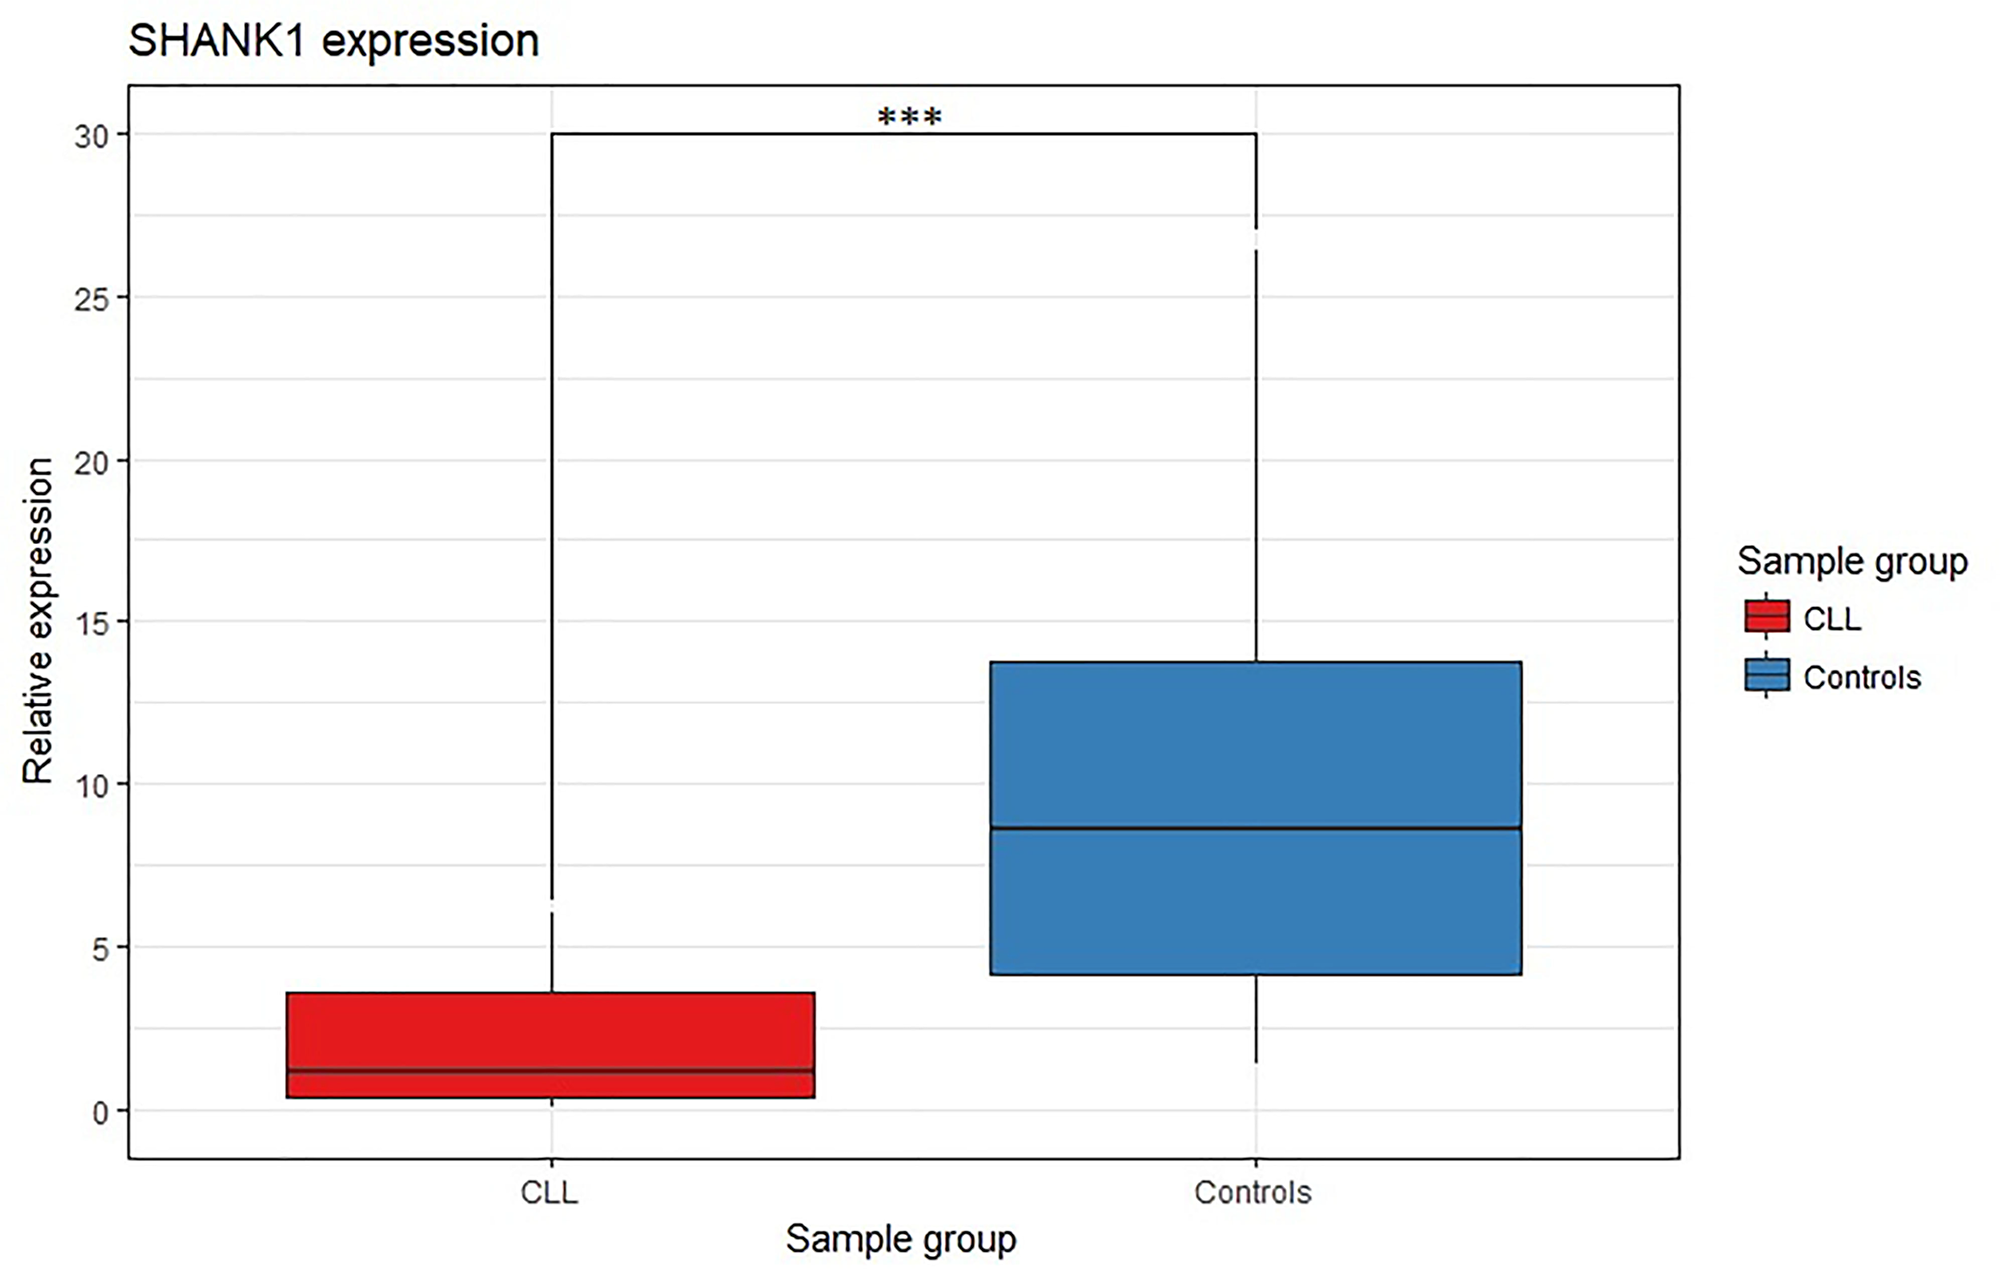 SHANK1 differential gene expression analysis between CLL and control samples.